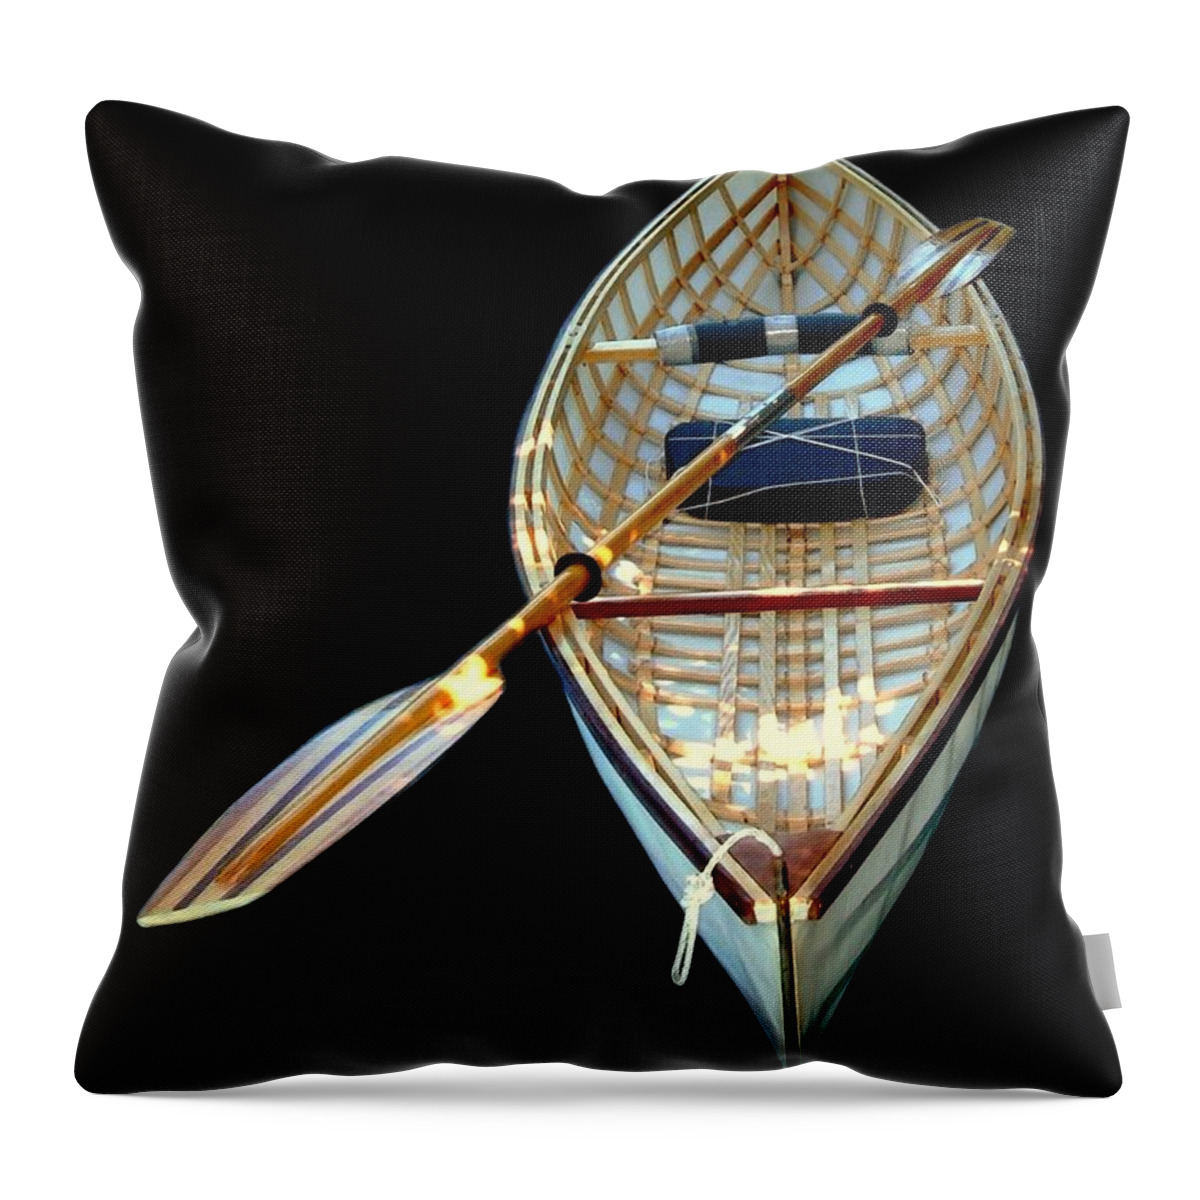 Canoe Throw Pillow featuring the digital art Eileen's Canoe by Dale  Ford